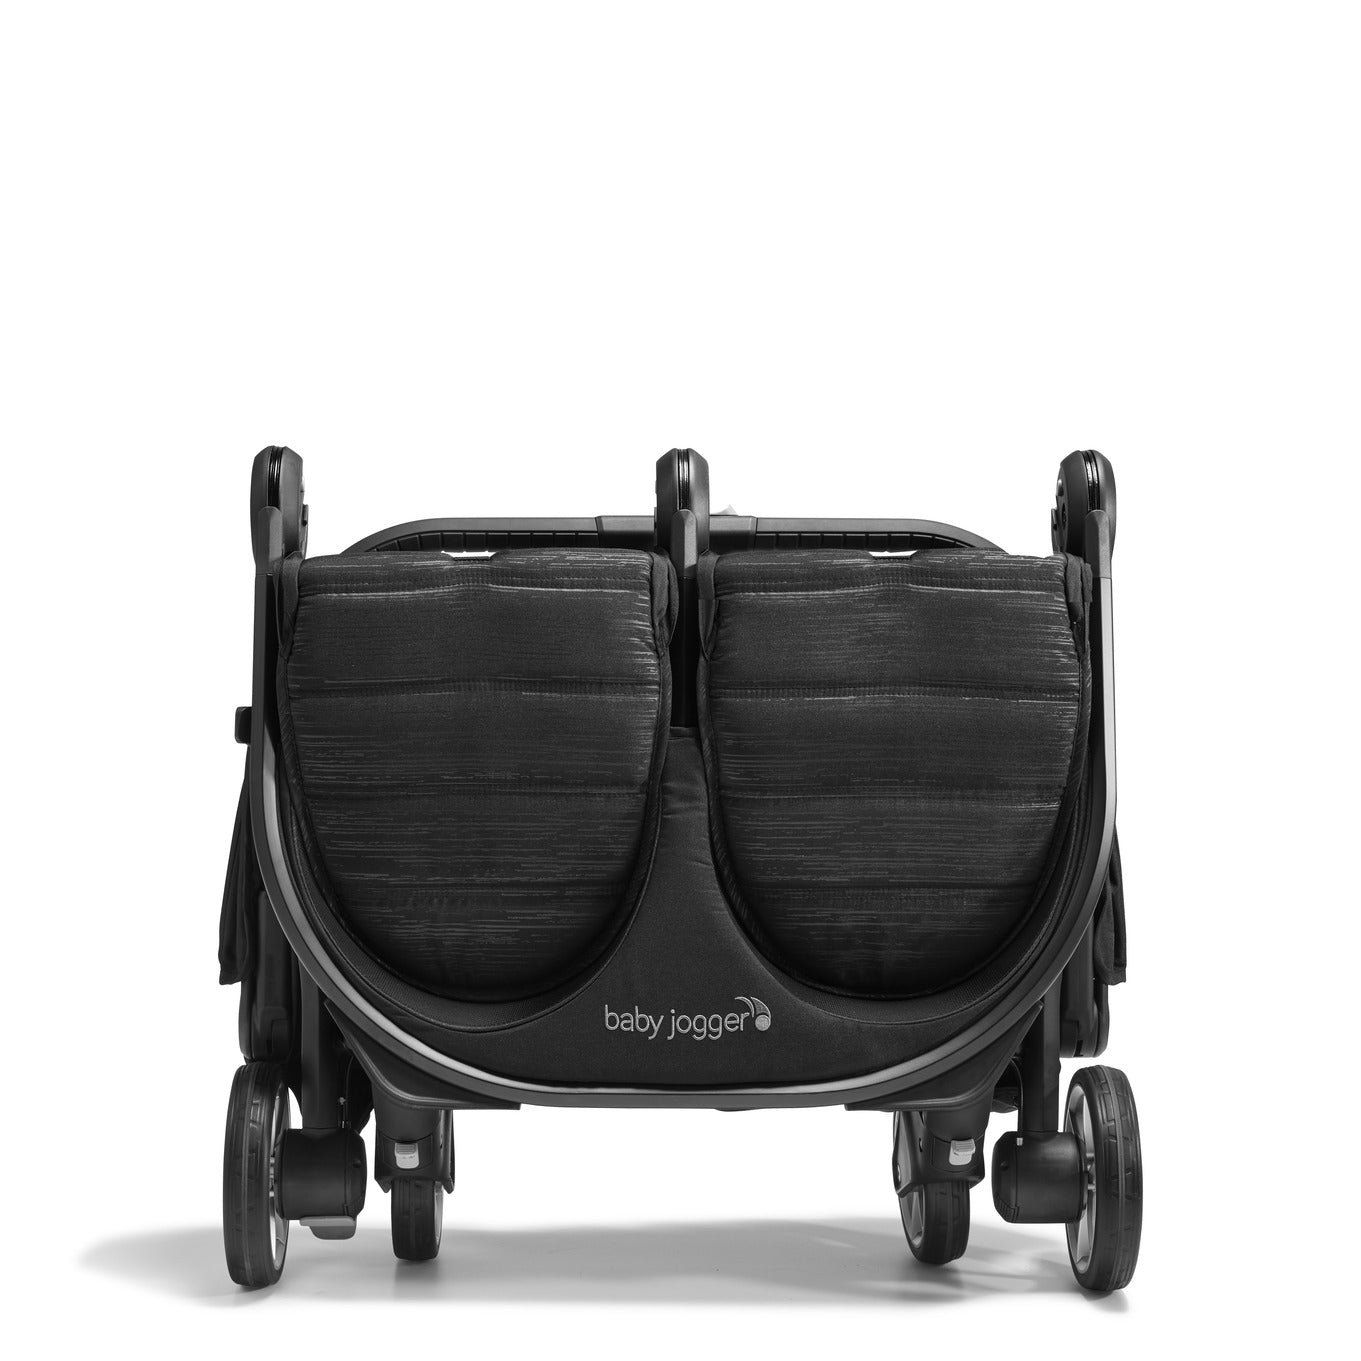 Baby Jogger City Tour 2 Double Stroller folded